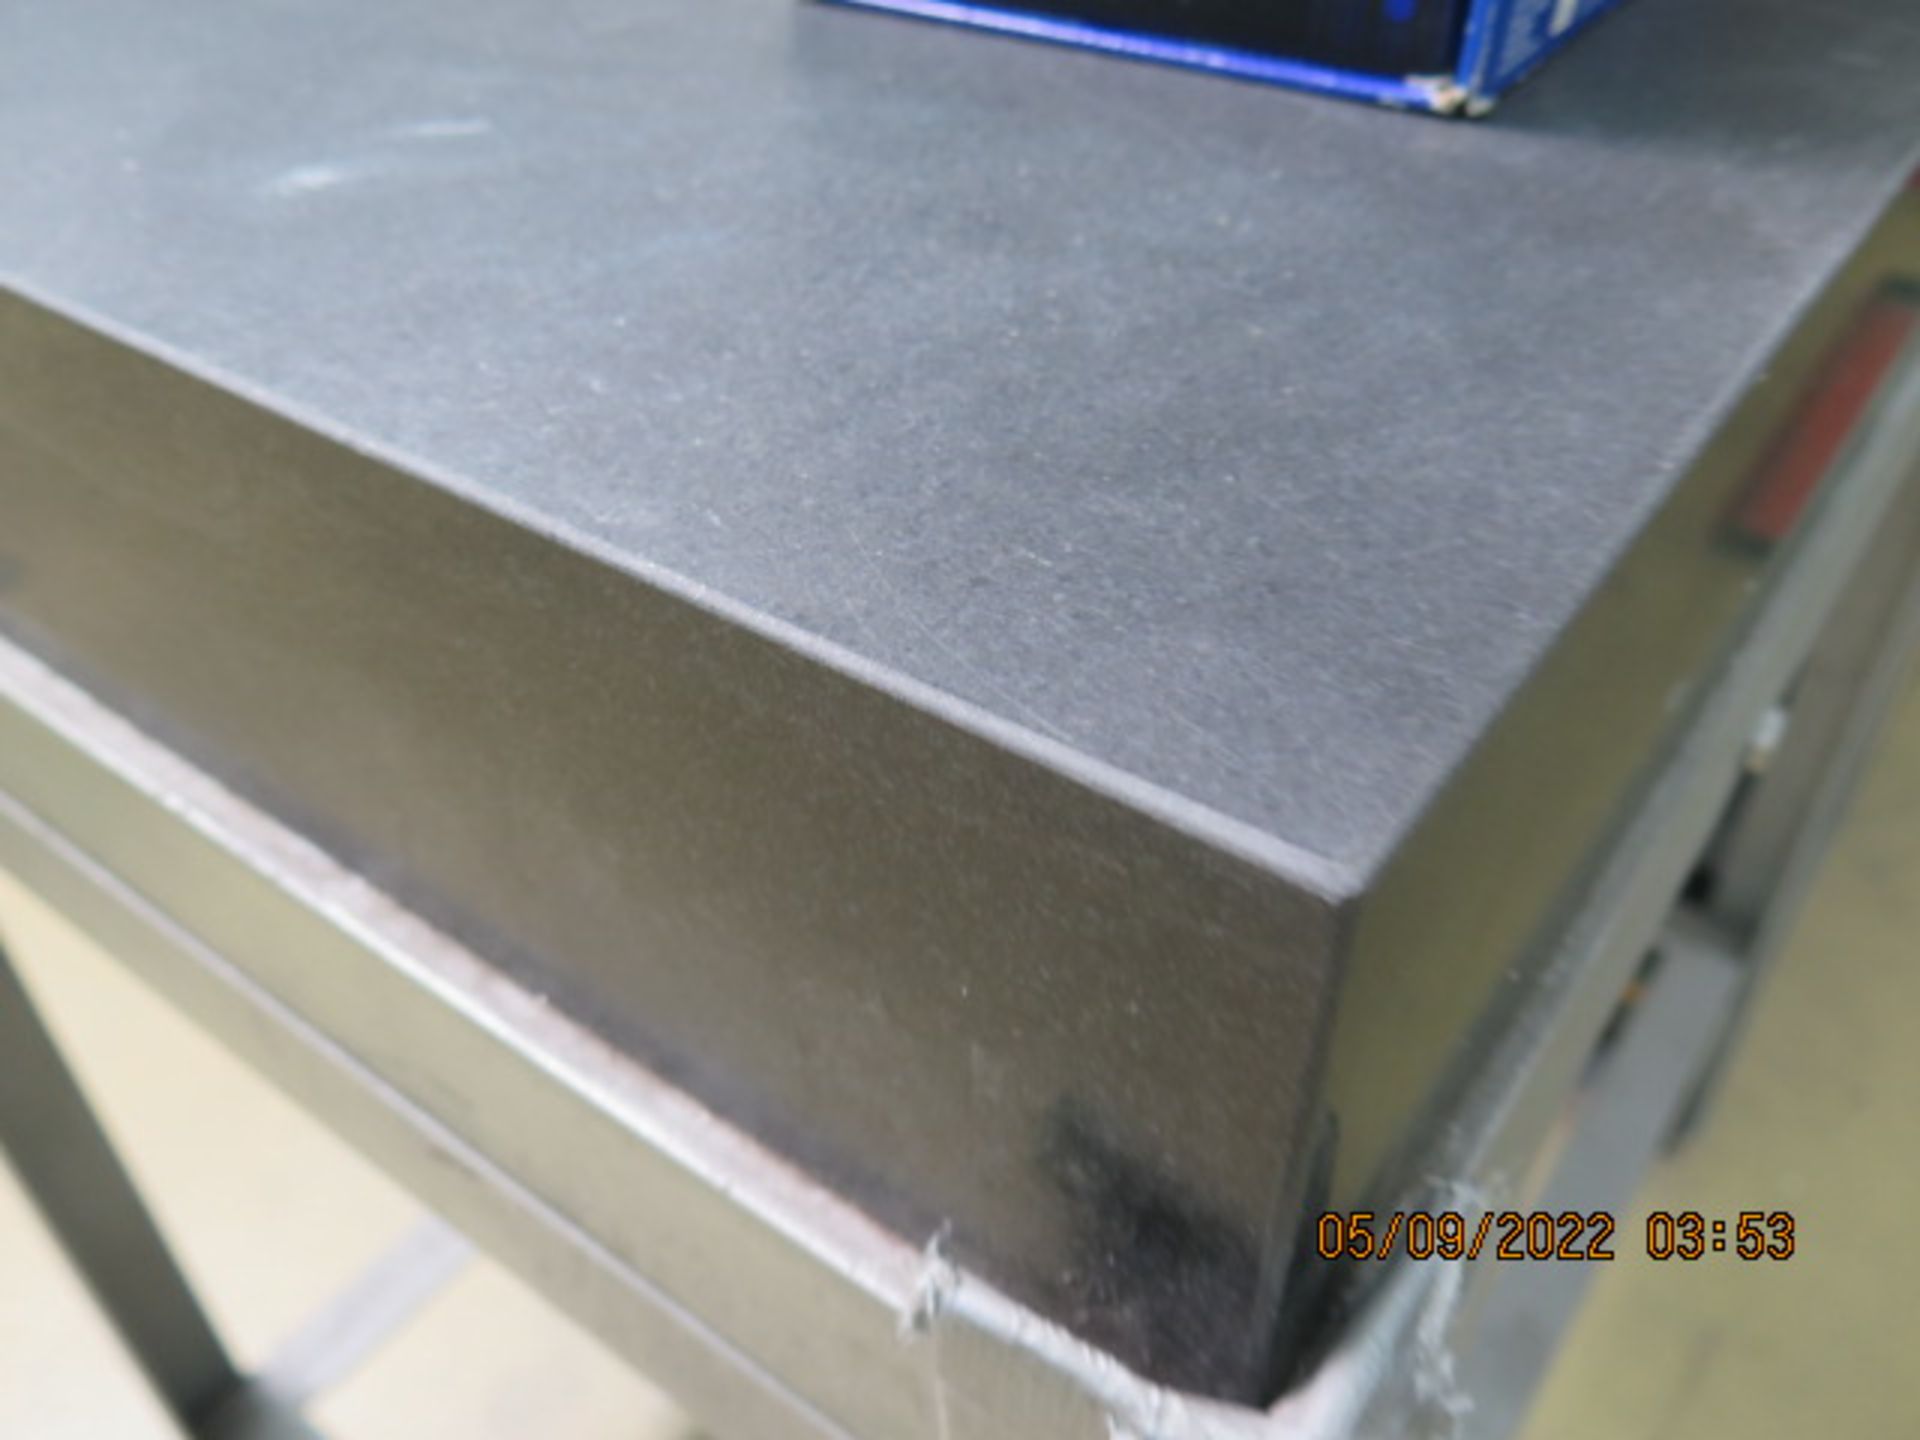 24" x 36" x 4" Granite Surface Plate w/ Stand (SOLD AS-IS - NO WARRANTY) - Image 4 of 5